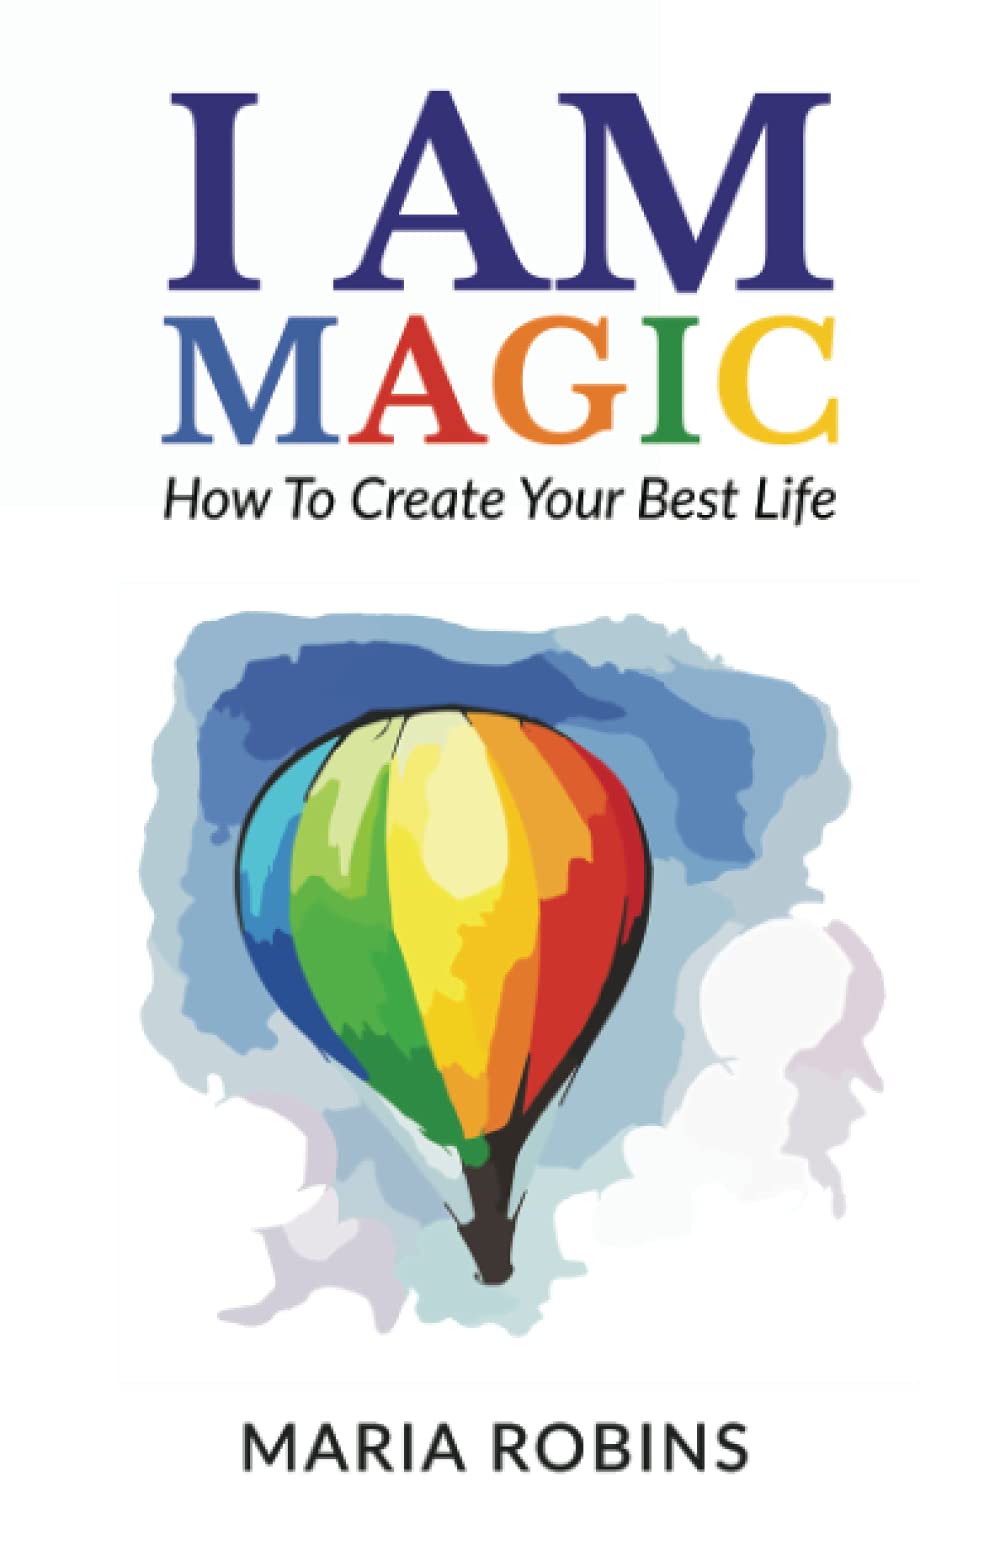 I AM Magic: How To Create Your Best Life SureShot Books